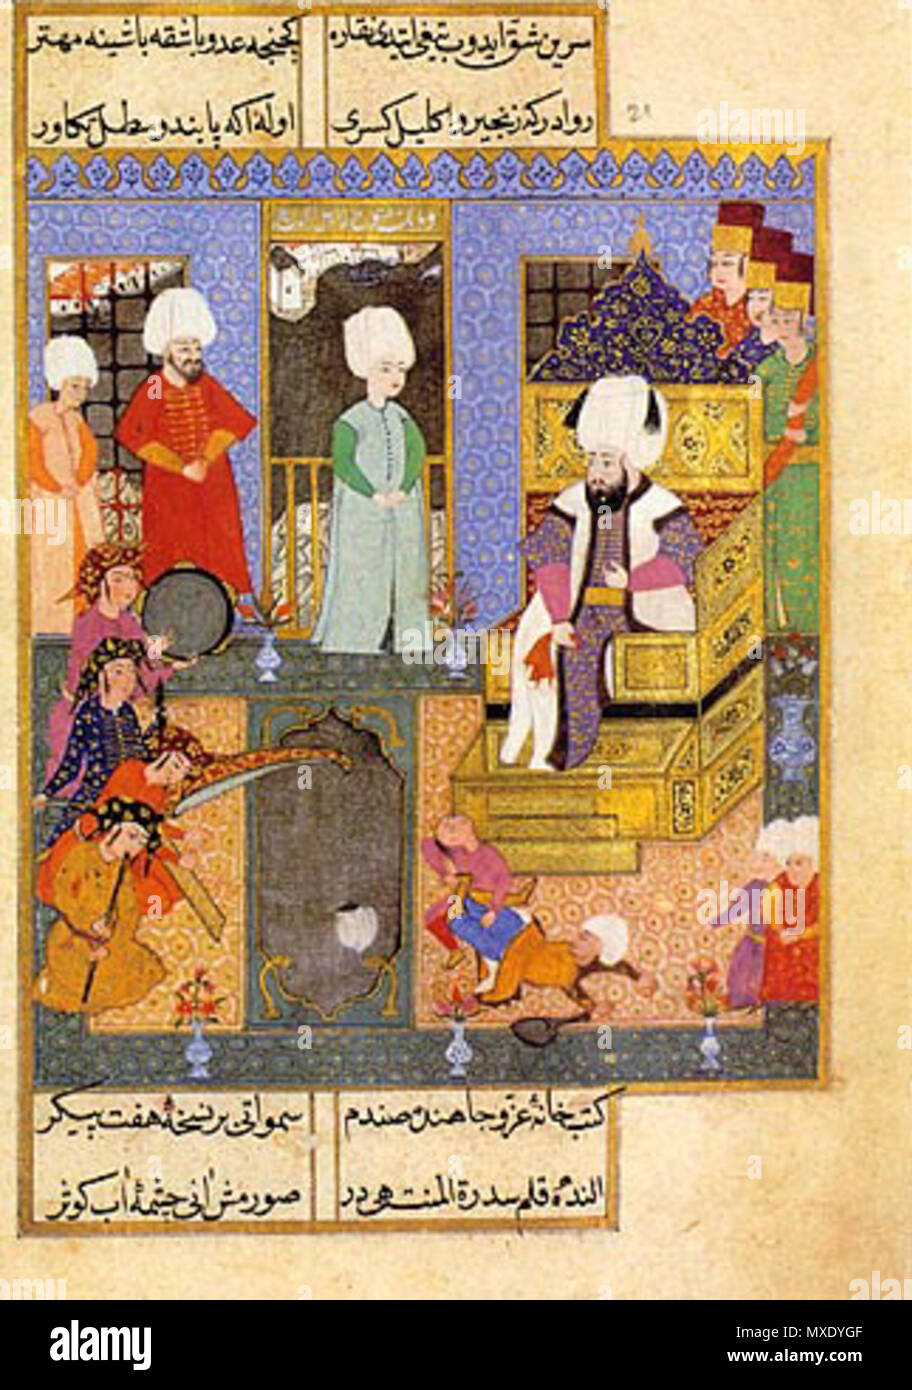 . Musicians in front of Sultan Mehmet III. Musicians with flutes, harps, fidels and drums are playing in front of the sultan. Ottoman miniature painting, from the poem anthology 'Mehmed bin Abdülgani bin Emirsah' (Pseudonym 'Nadiri“), in the style of Ahmet Naksi. Topkapı Sarayı Müzesi, Istanbul (Inv. H. 889, f ° 8 v°) . Anfang 17. Jh.. Ottoman miniature painter 436 Nadiri f 8 v Stock Photo